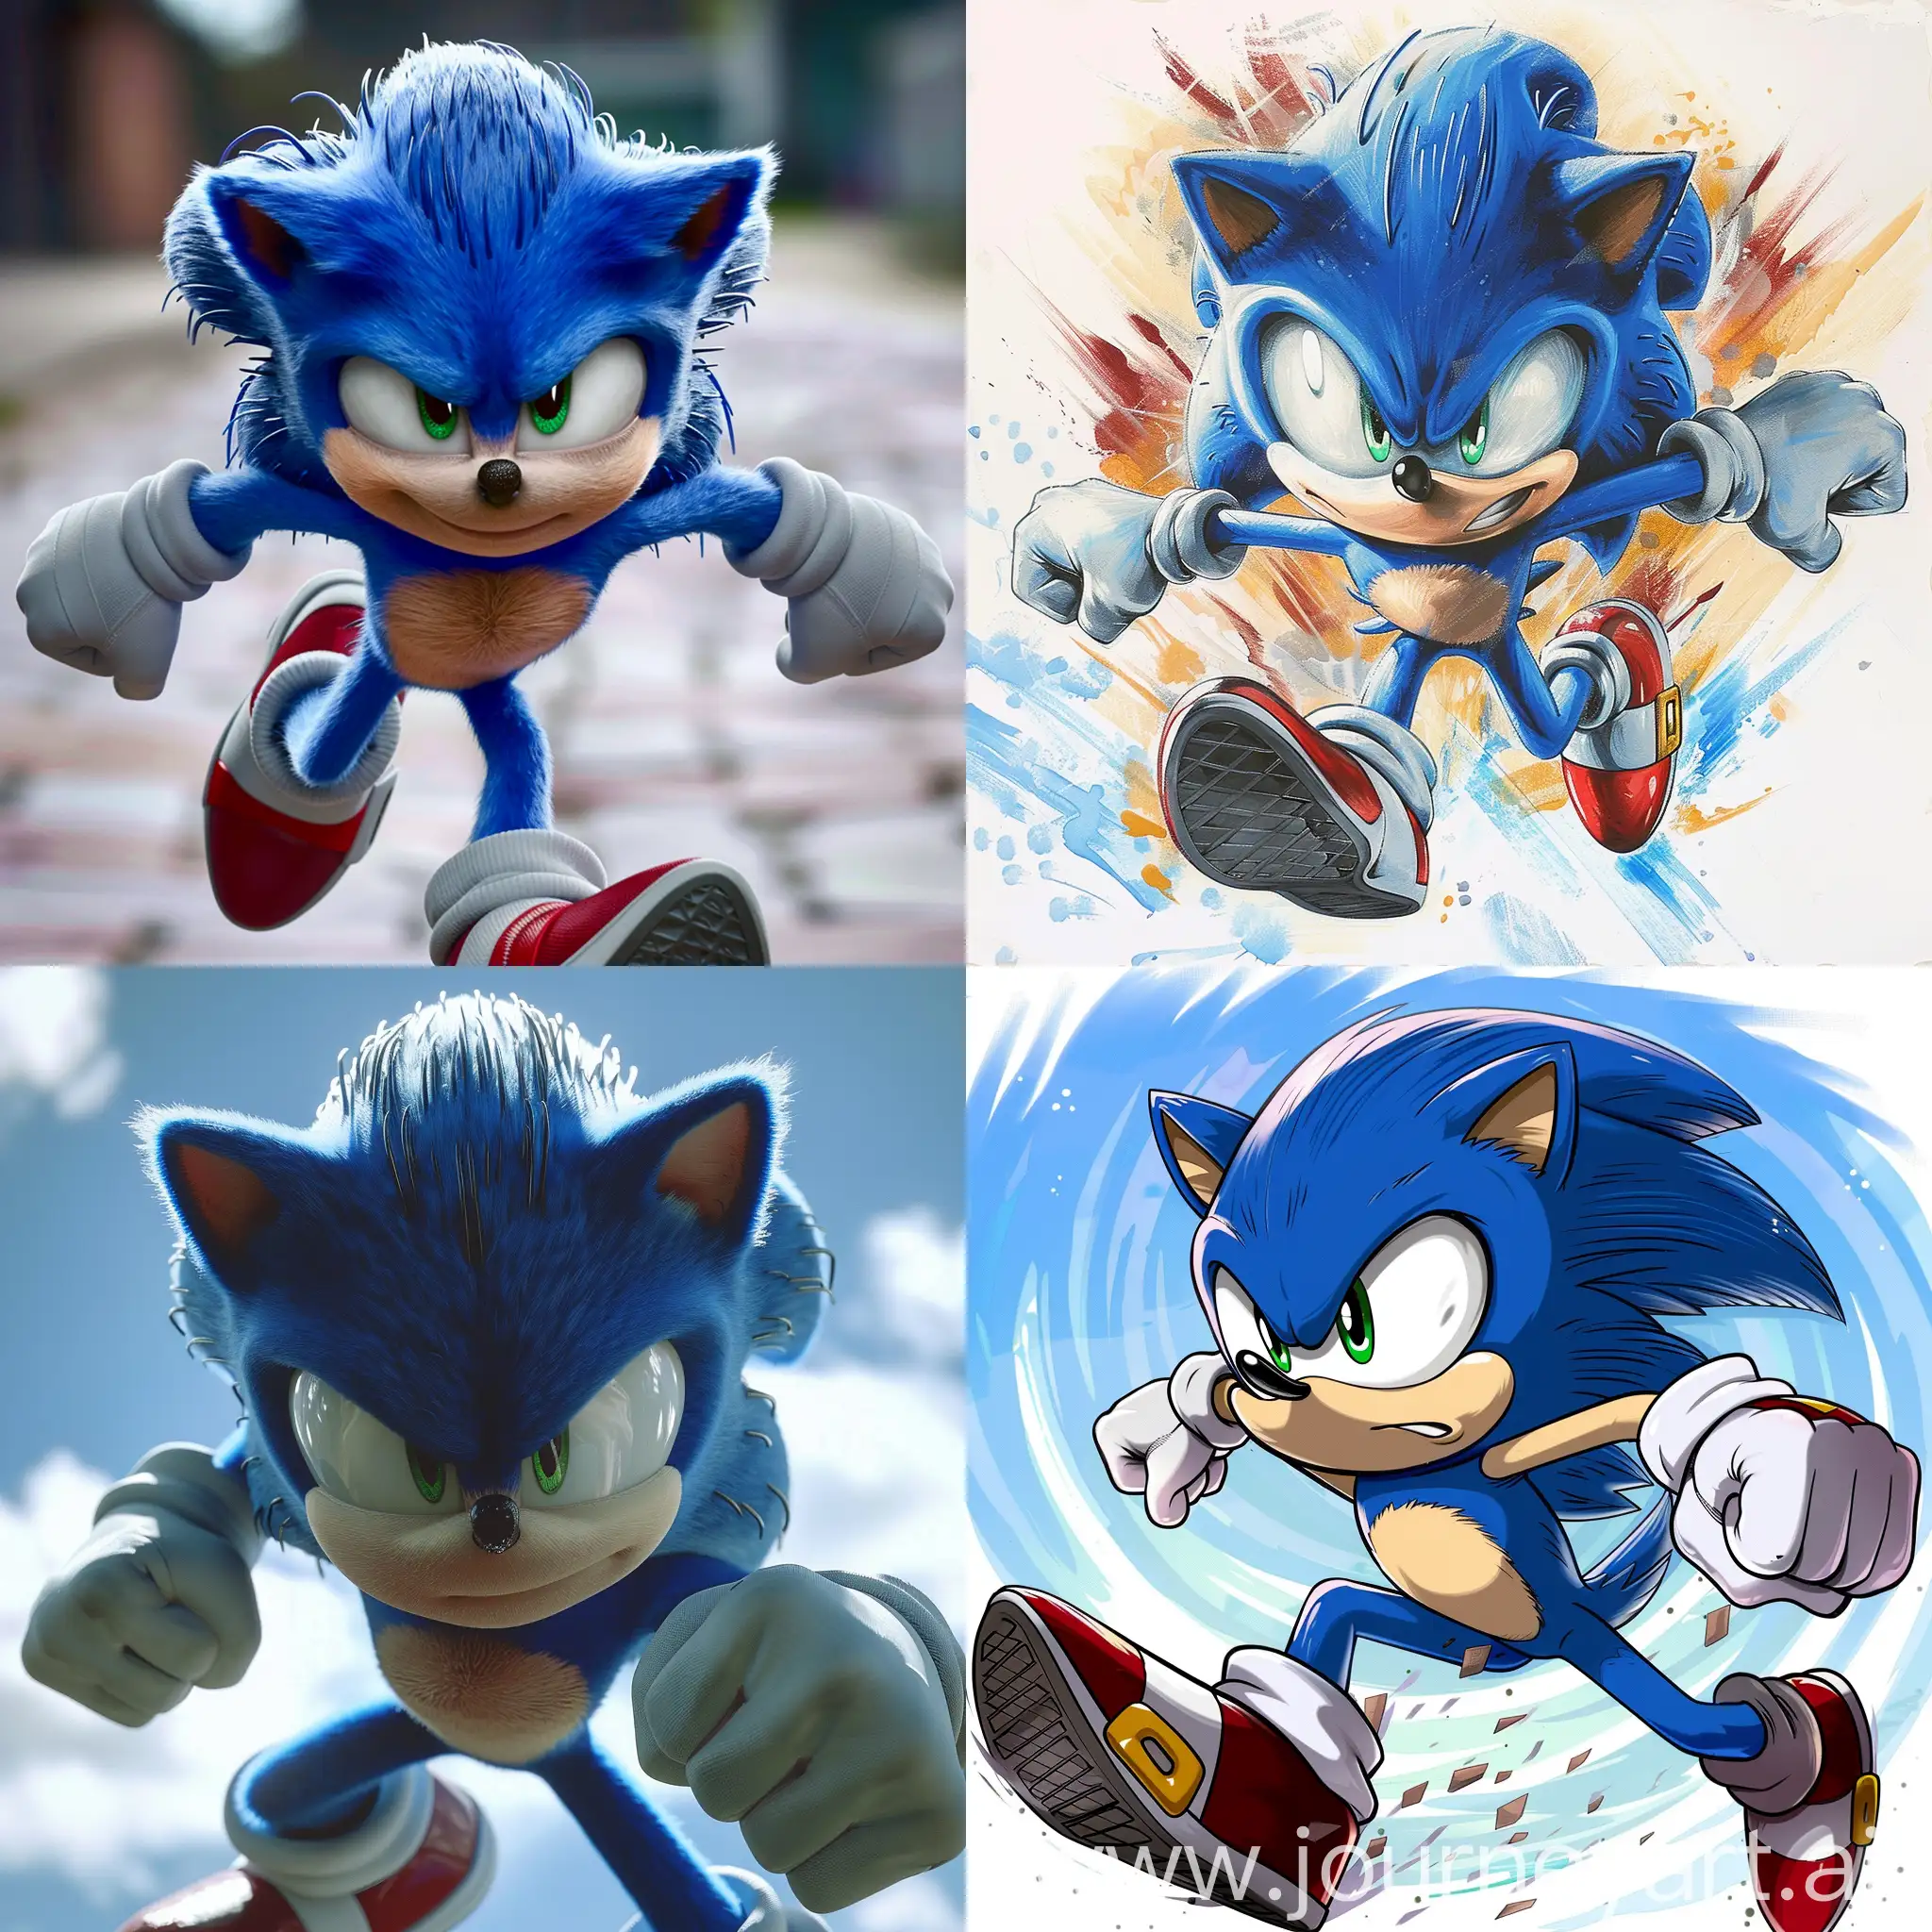 Sonic-the-Hedgehog-in-Super-Speed-Mode